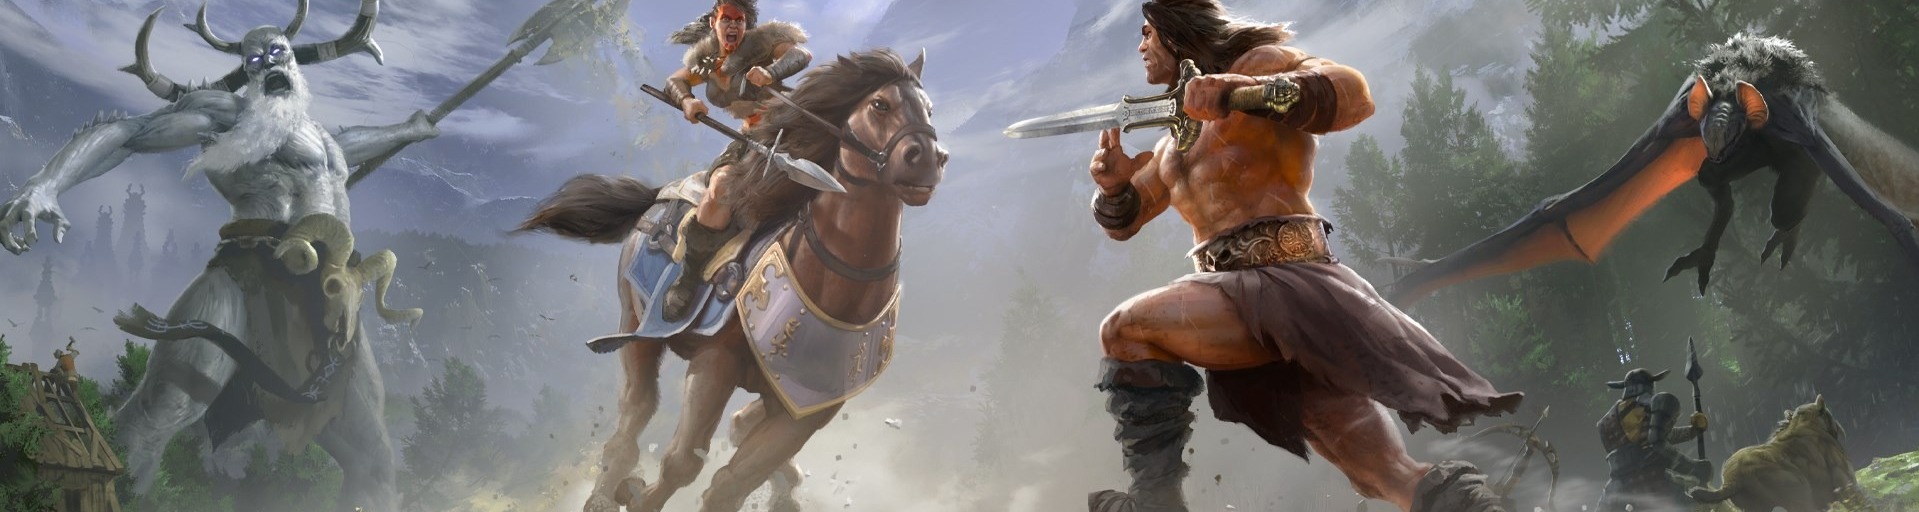 Conan Exiles - The Savage Frontier Pack DLC Steam CD Key bg